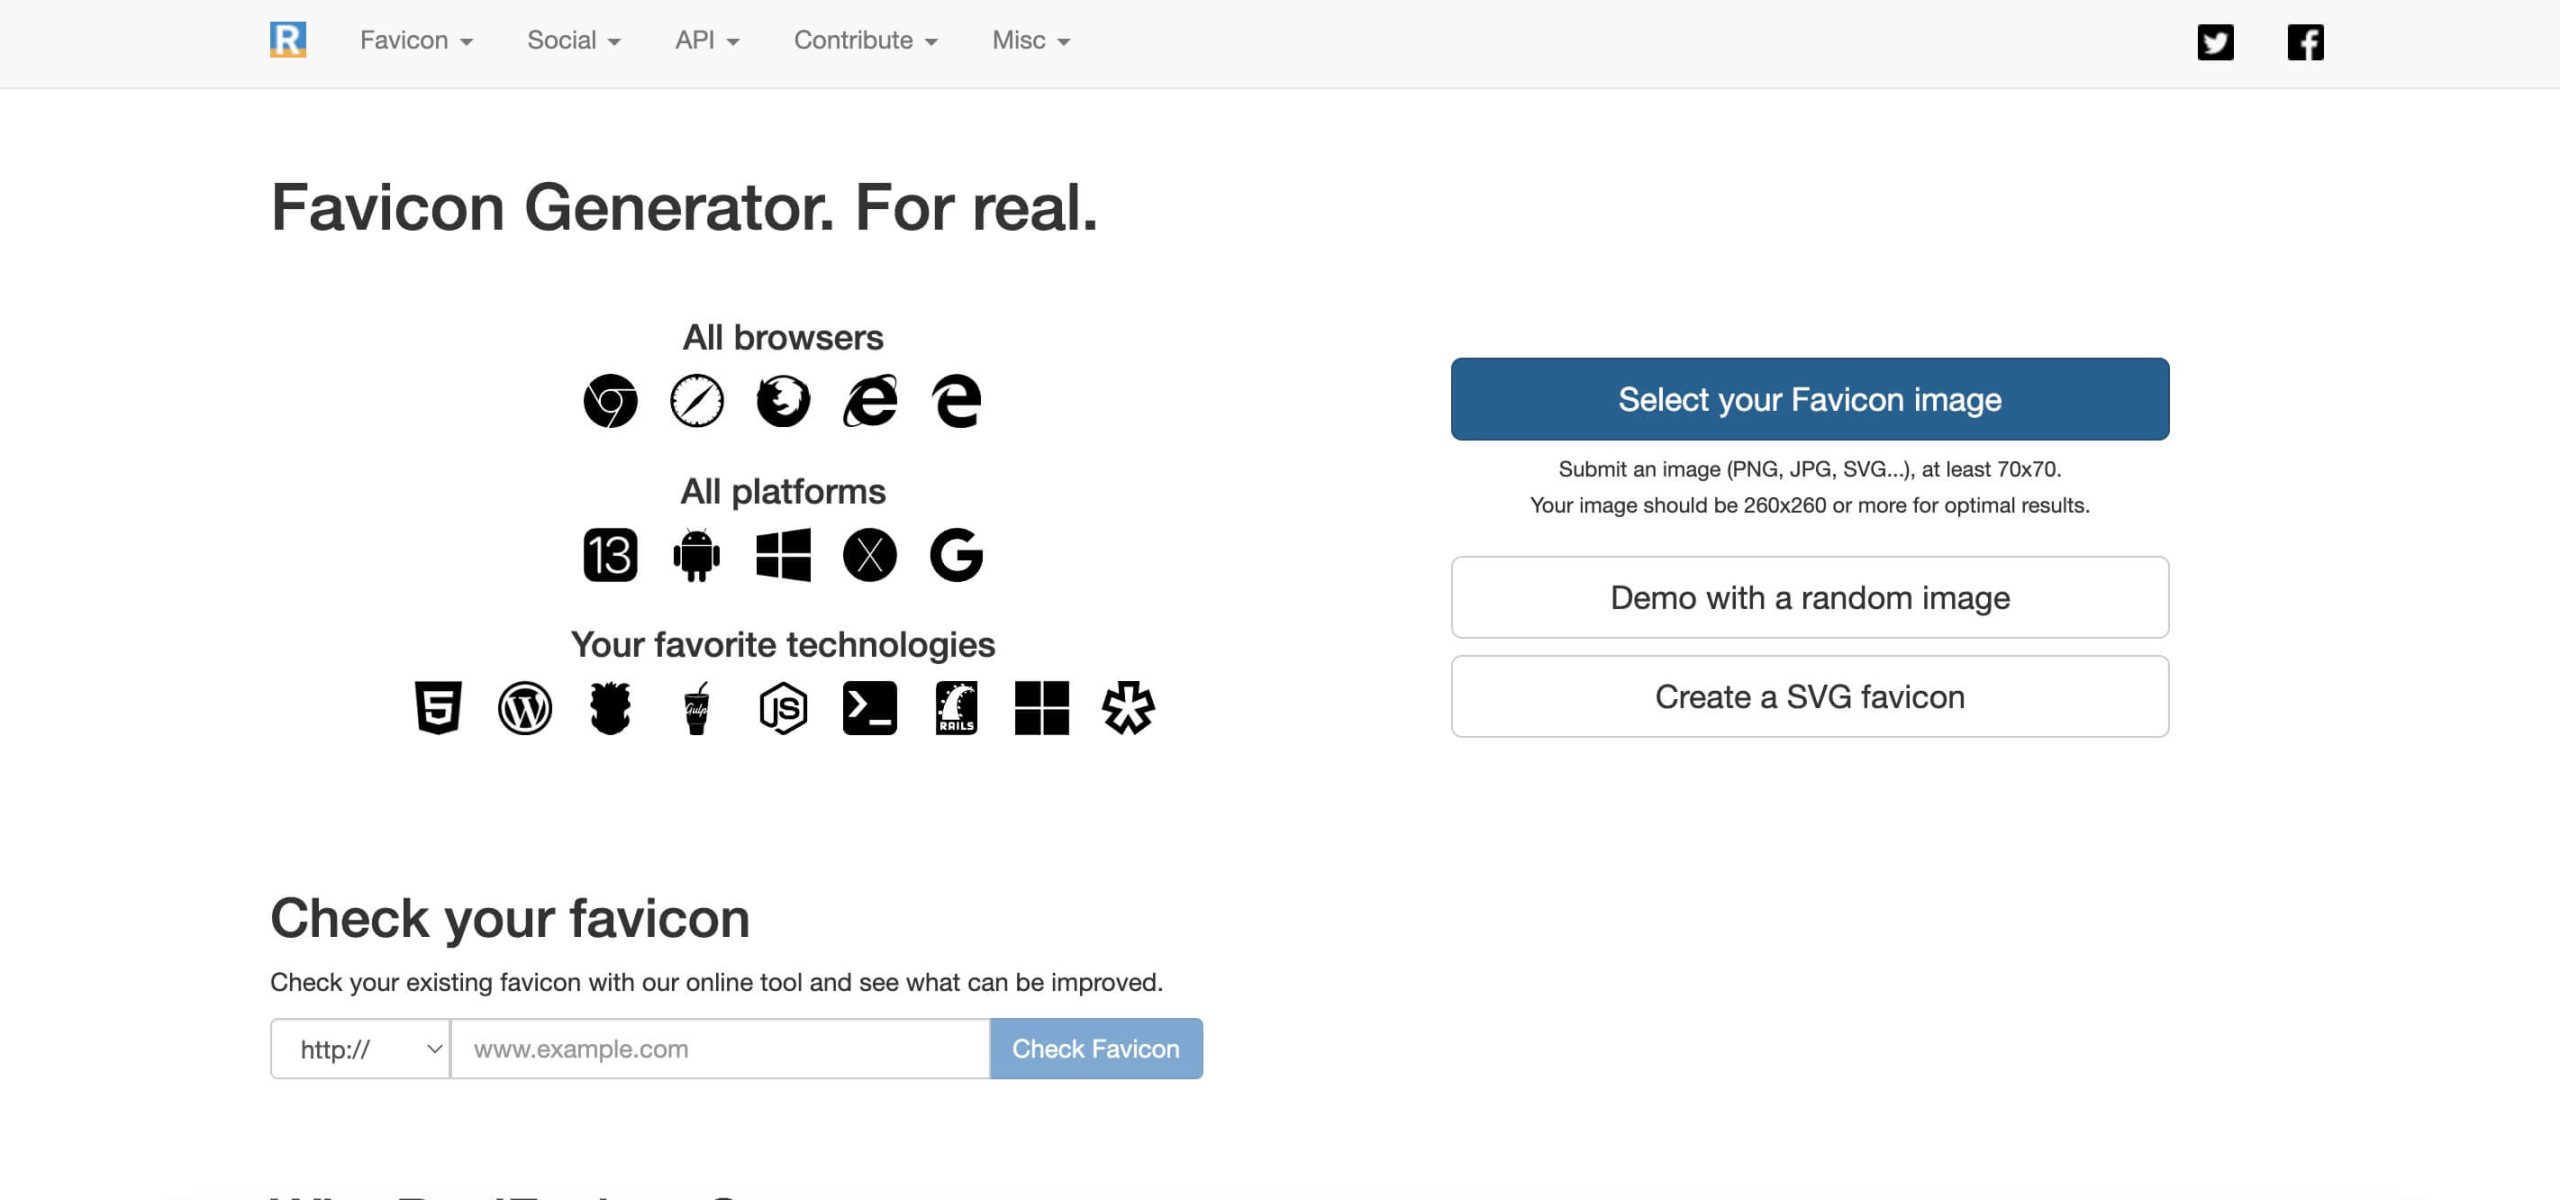 Screenshot showing how to upload a favicon image in the RealFaviconGenerator website